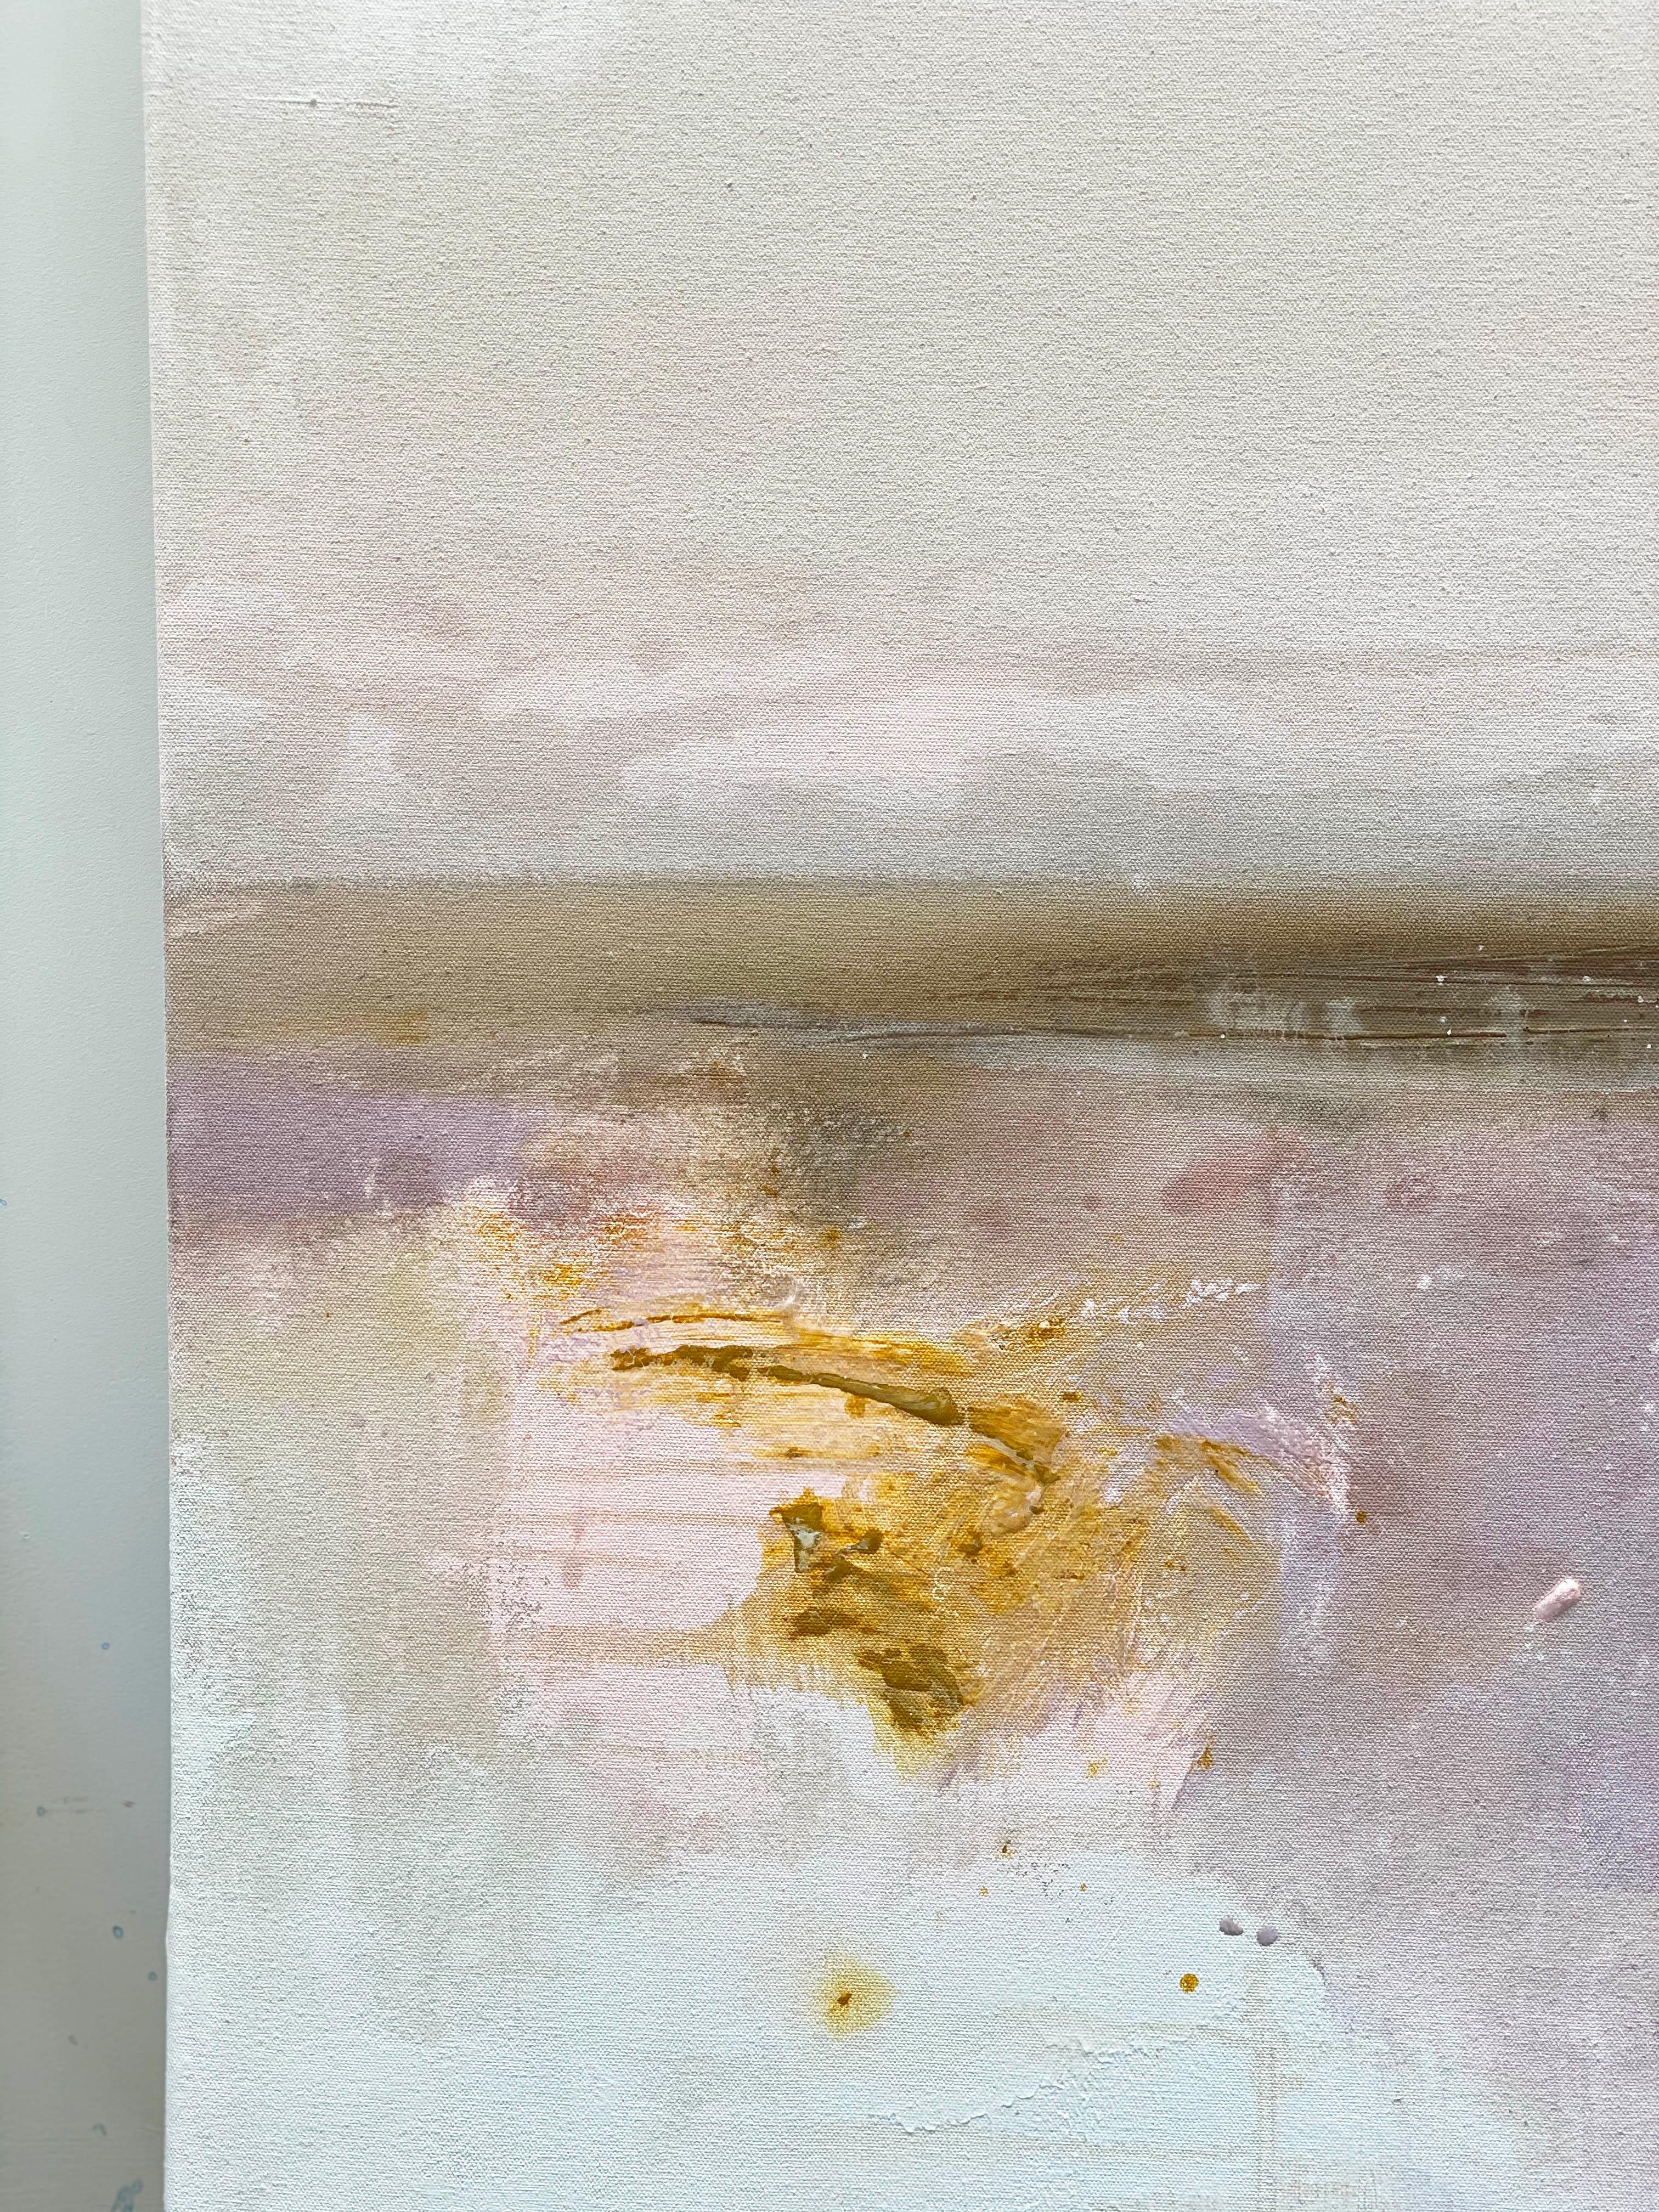 A dynamic abstract expressionist landscape in soft light pinks and tans. Descriptive textures, delicate details in earthy tones and pink levels emanate light, energy and movement. The perfect balance and harmony inspired by our natural world. This